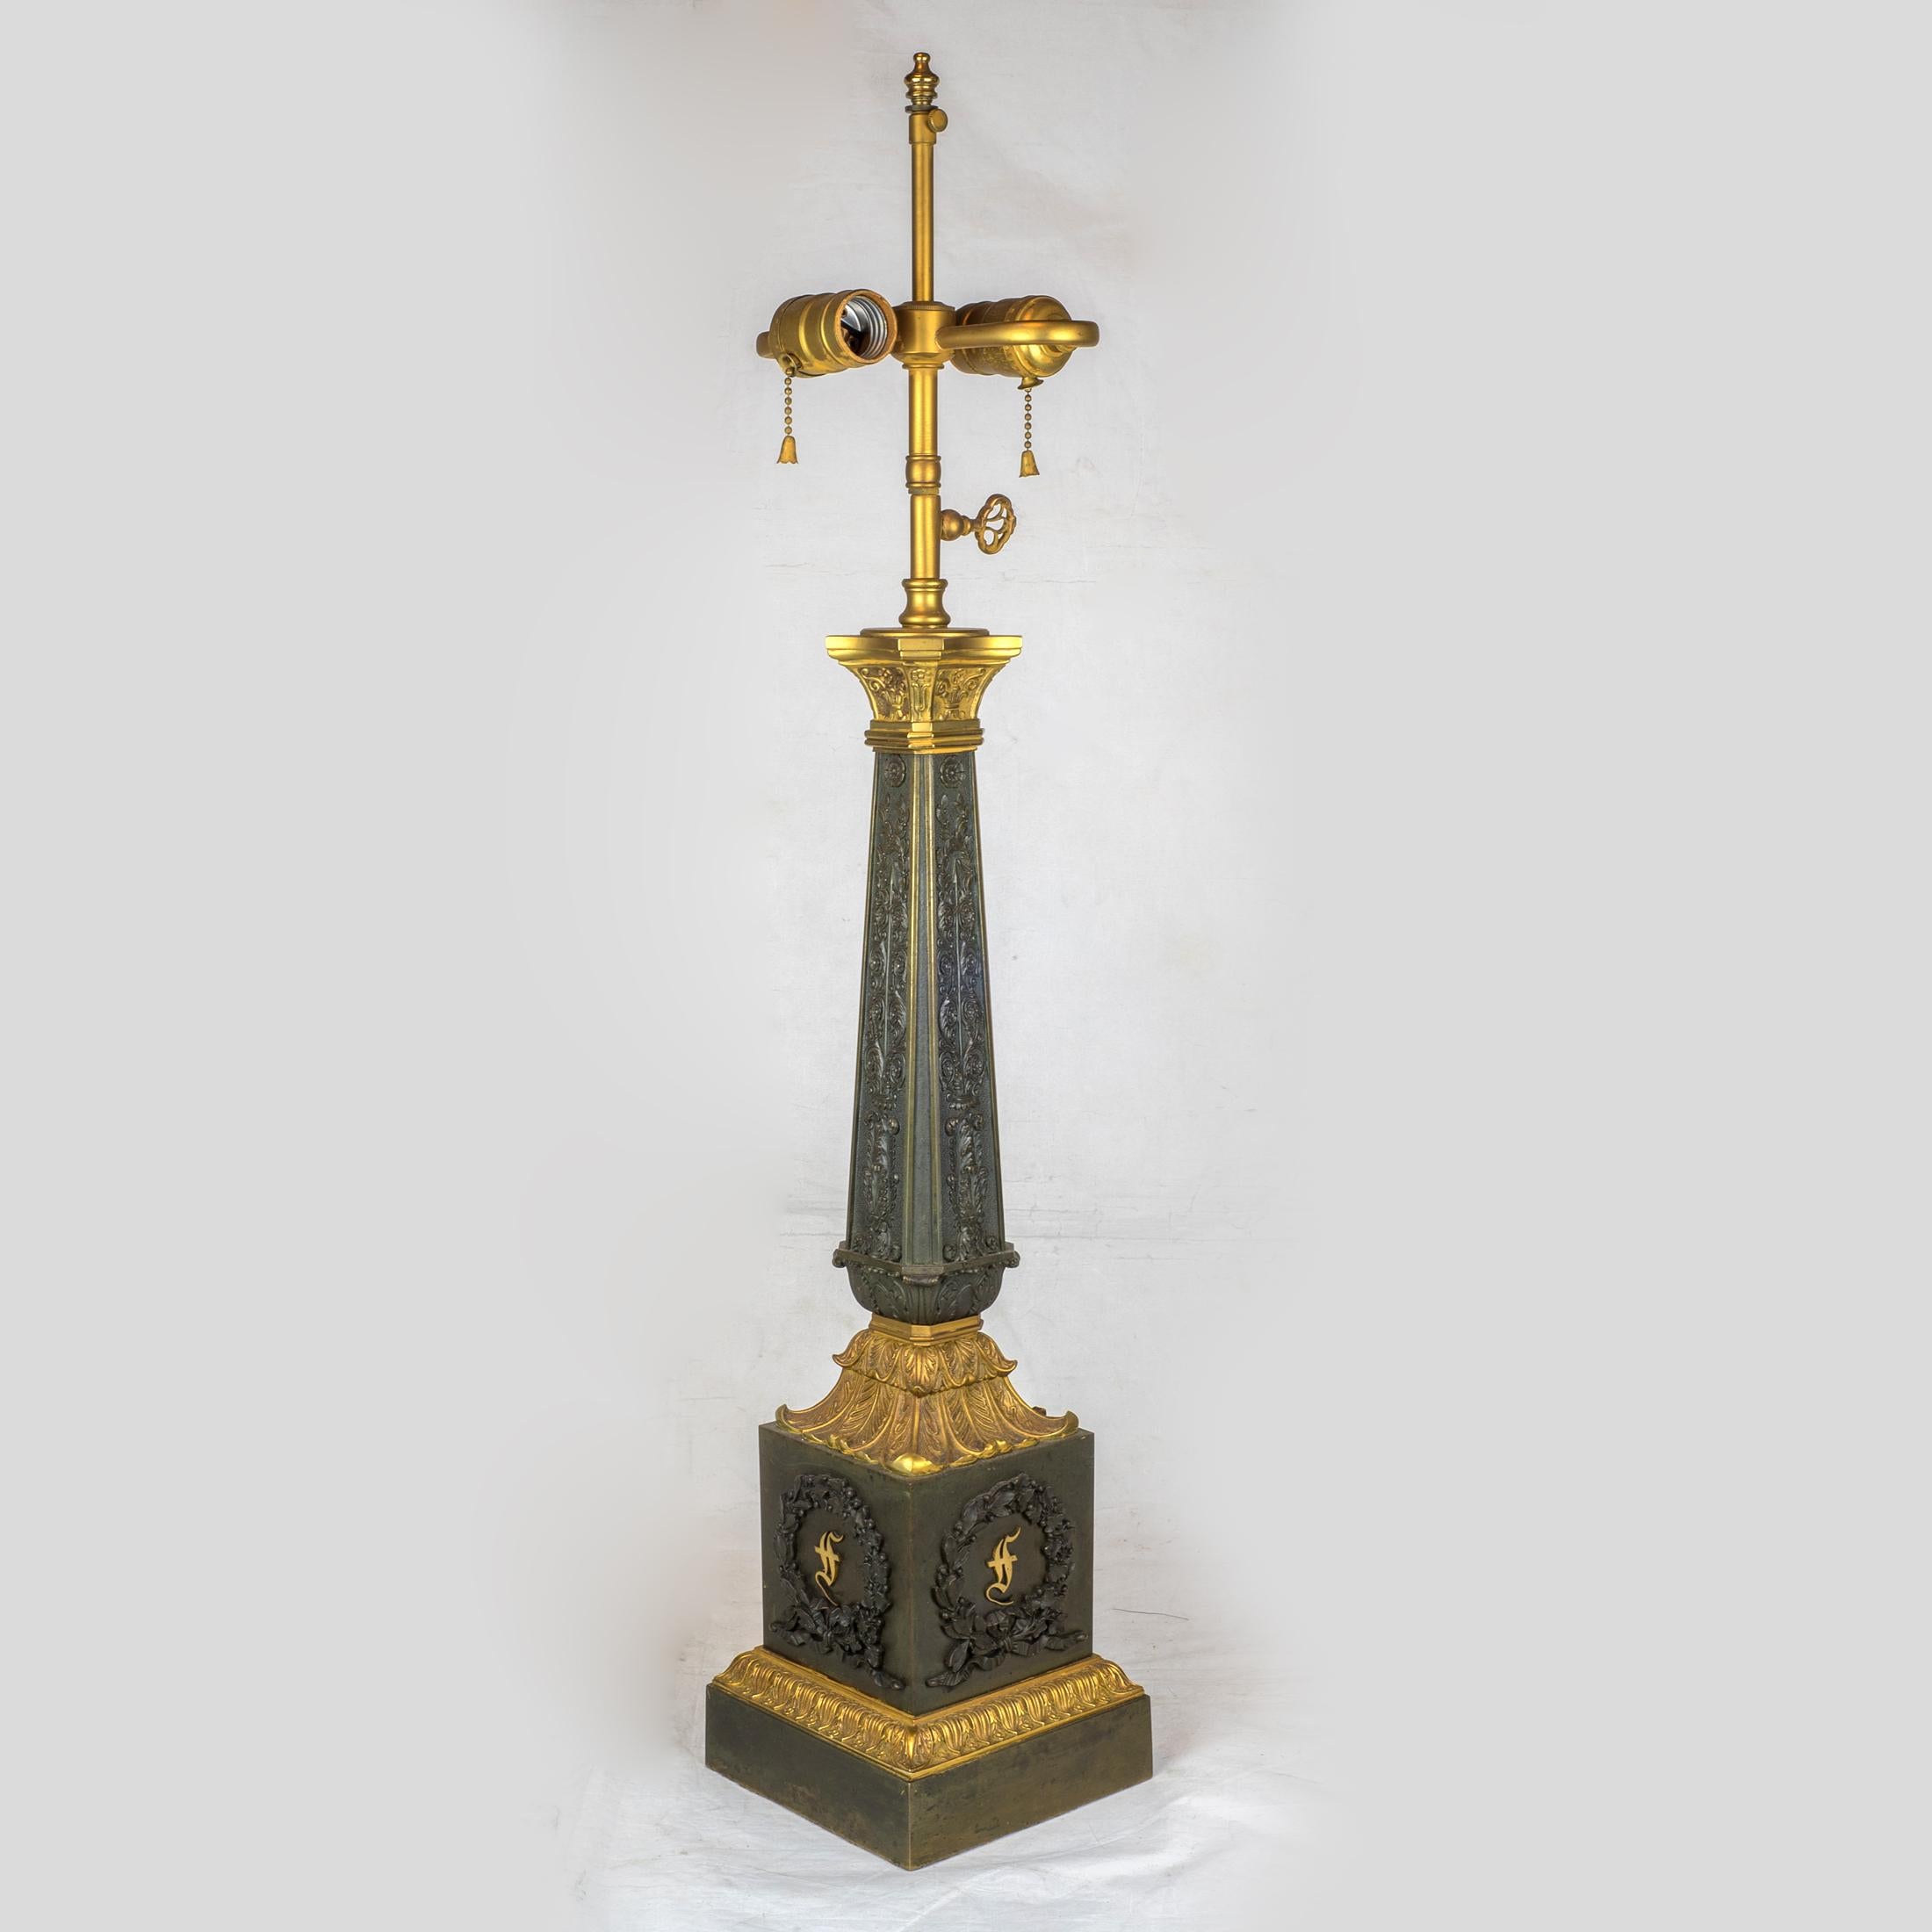 A highly decorative pair of 19th century French Empire gilt bronze and patinated bronze lamps on square base. Each of the four sides of the base having a reef design. The rest of the lamp covered in efflorescent scenes.

Origin: French
Date: 19th